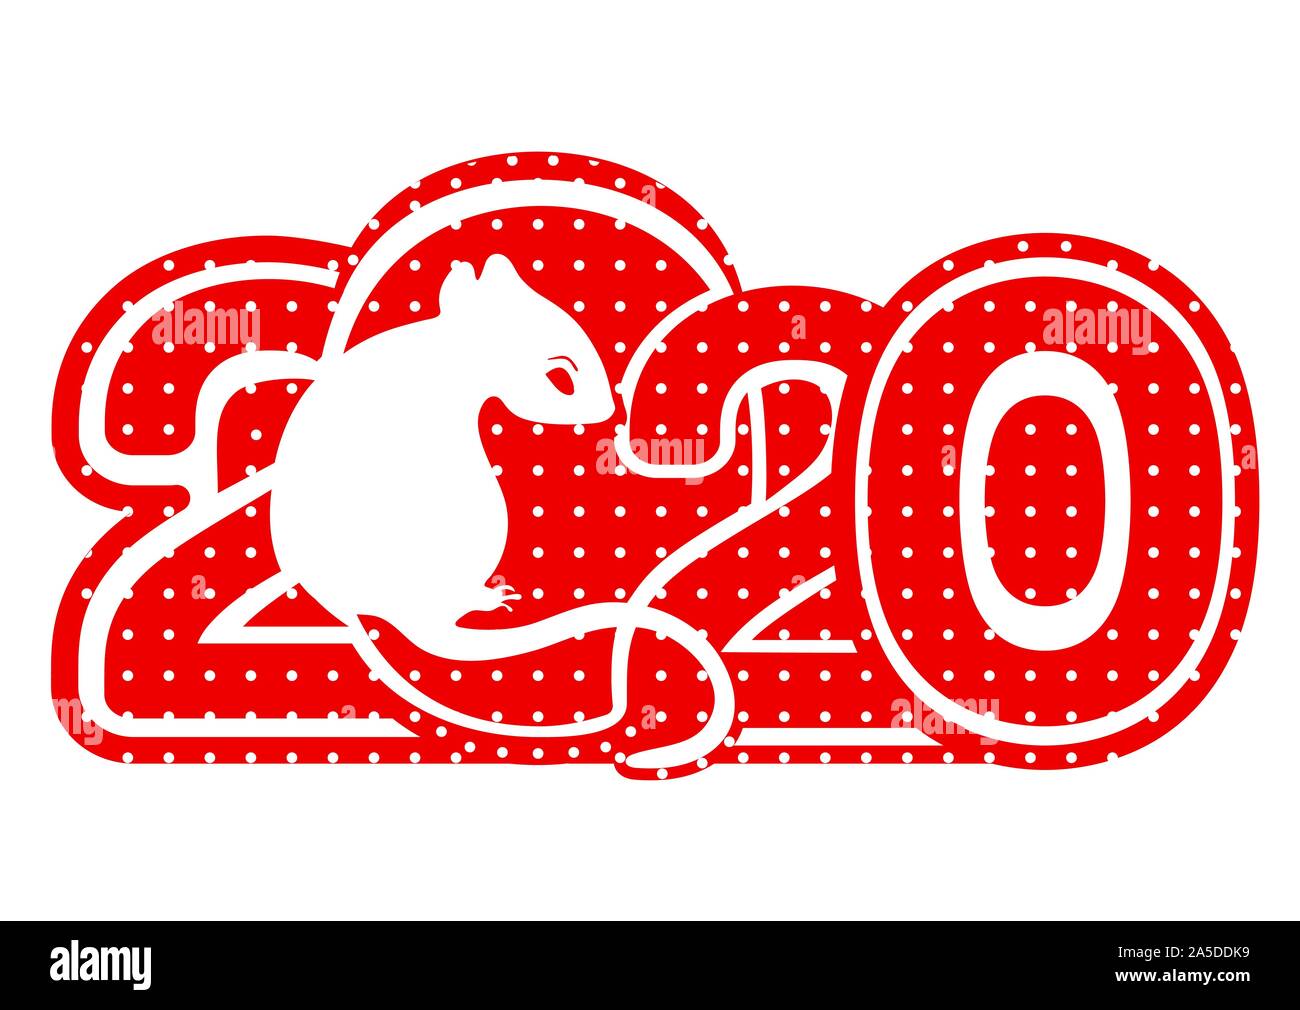 2020 logo, icon, White Metal Rat is a symbol of the 2020 Chinese New Year, card, banner, vector illustration. Red silhouette zodiac sign and numbers p Stock Vector